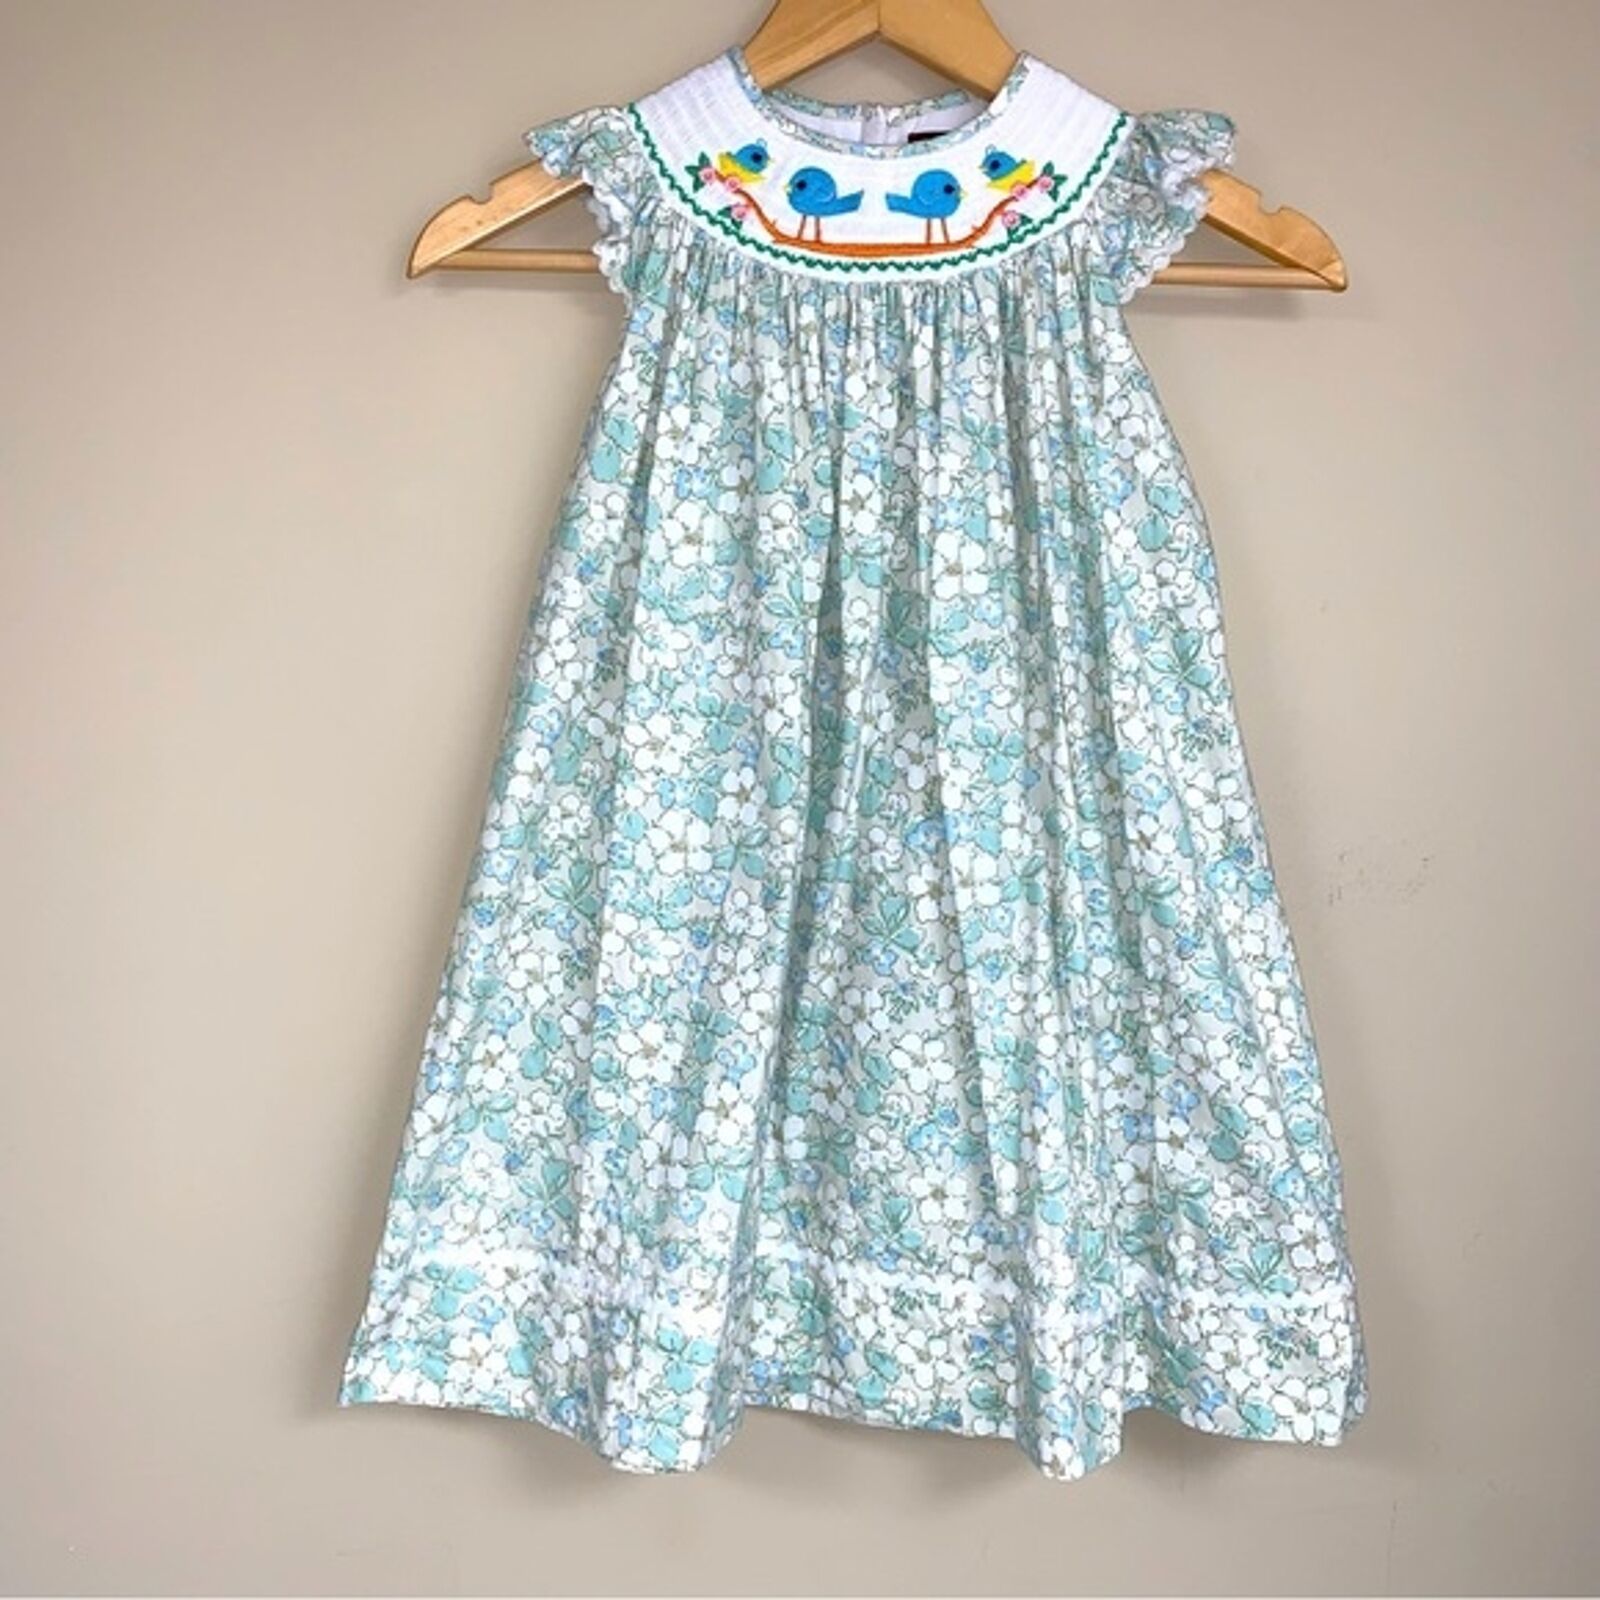 Primary image for Lil Cactus Smocked Sundress Girl’s 5 Dress Blue Birds Floral Resort Party Xmas